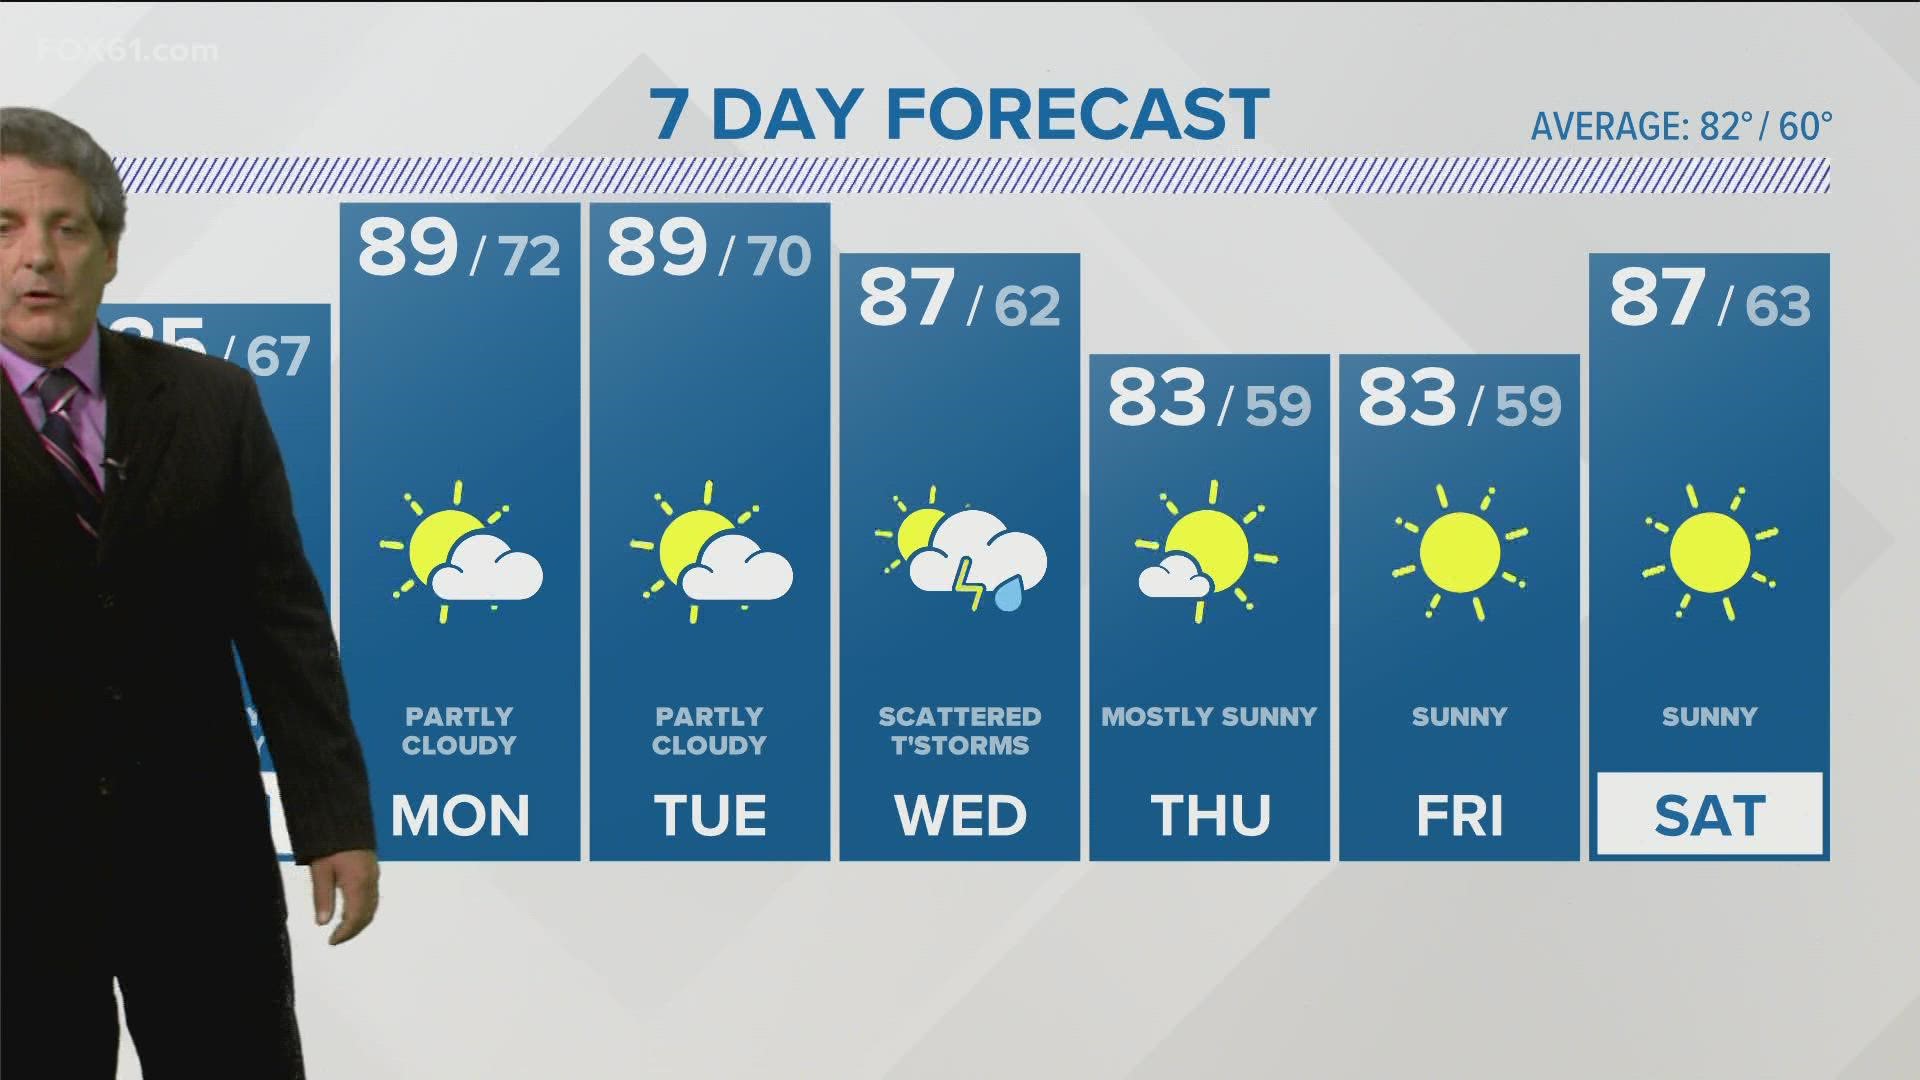 Warm and pleasant Sunday, turning warmer and more humid Monday - Wednesday of next week.